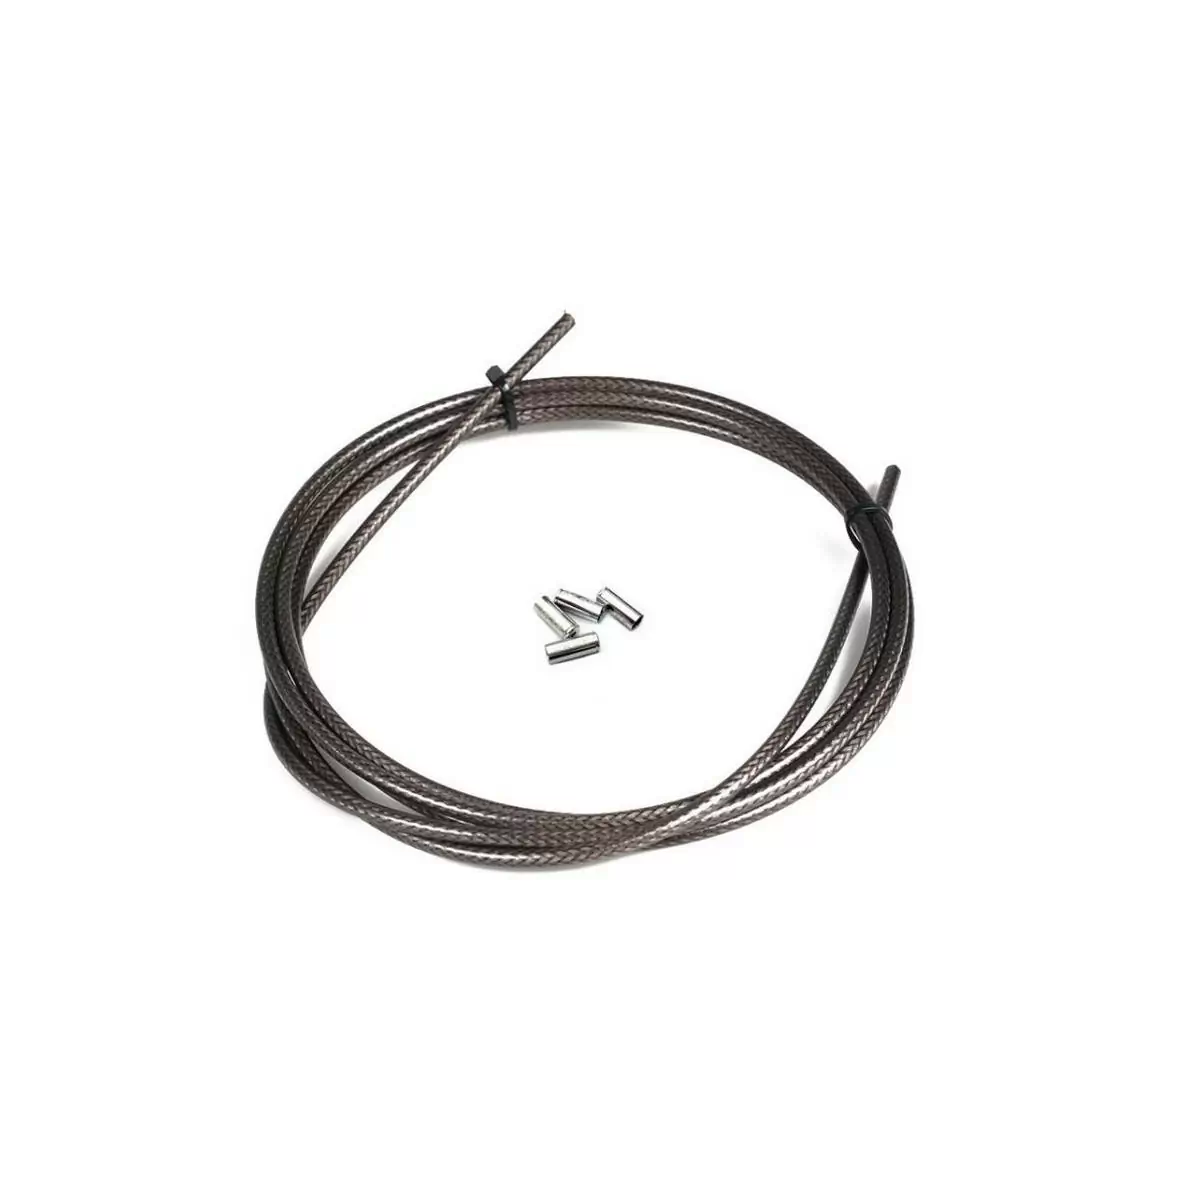 brake cable outer housing 5mm x 2,5m carbon black - image